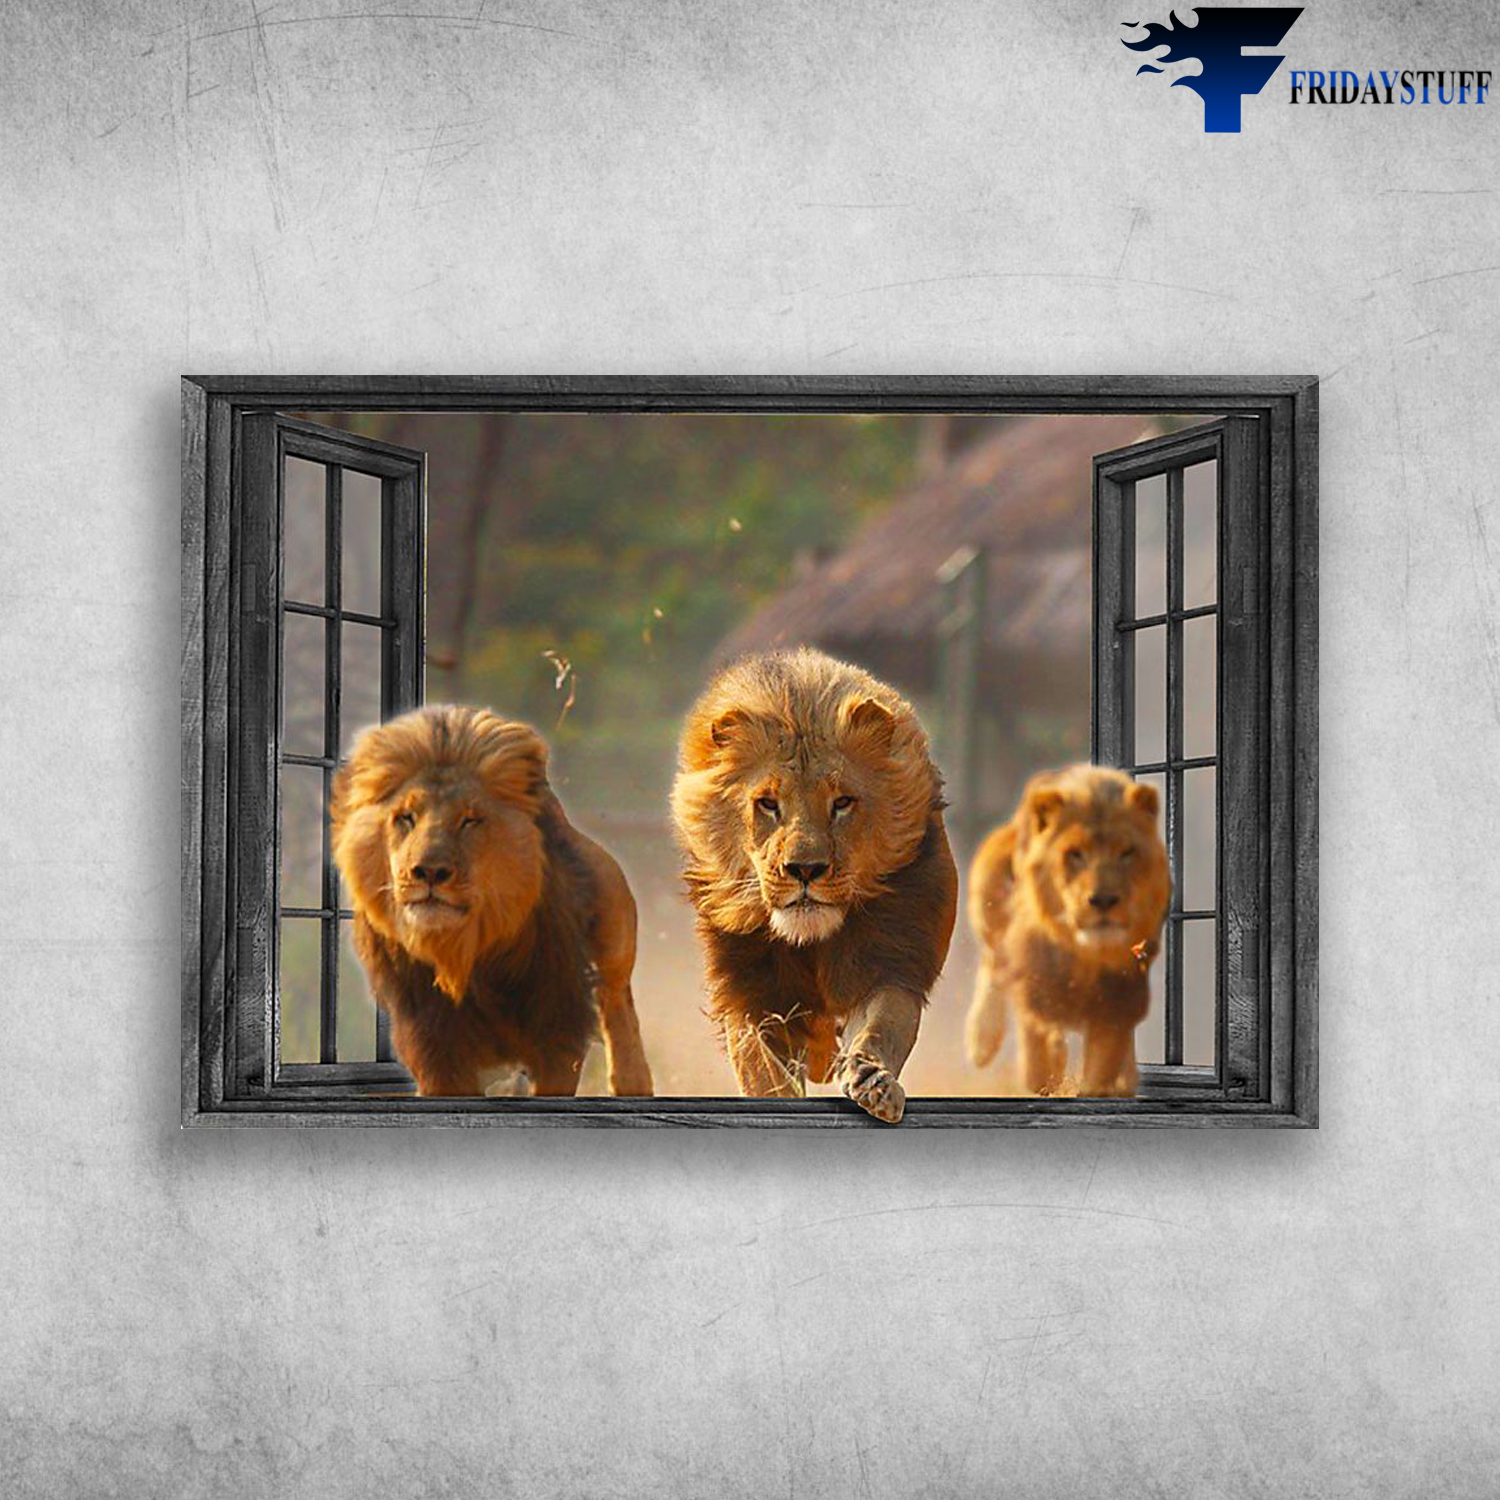 The Lions Outside The Window